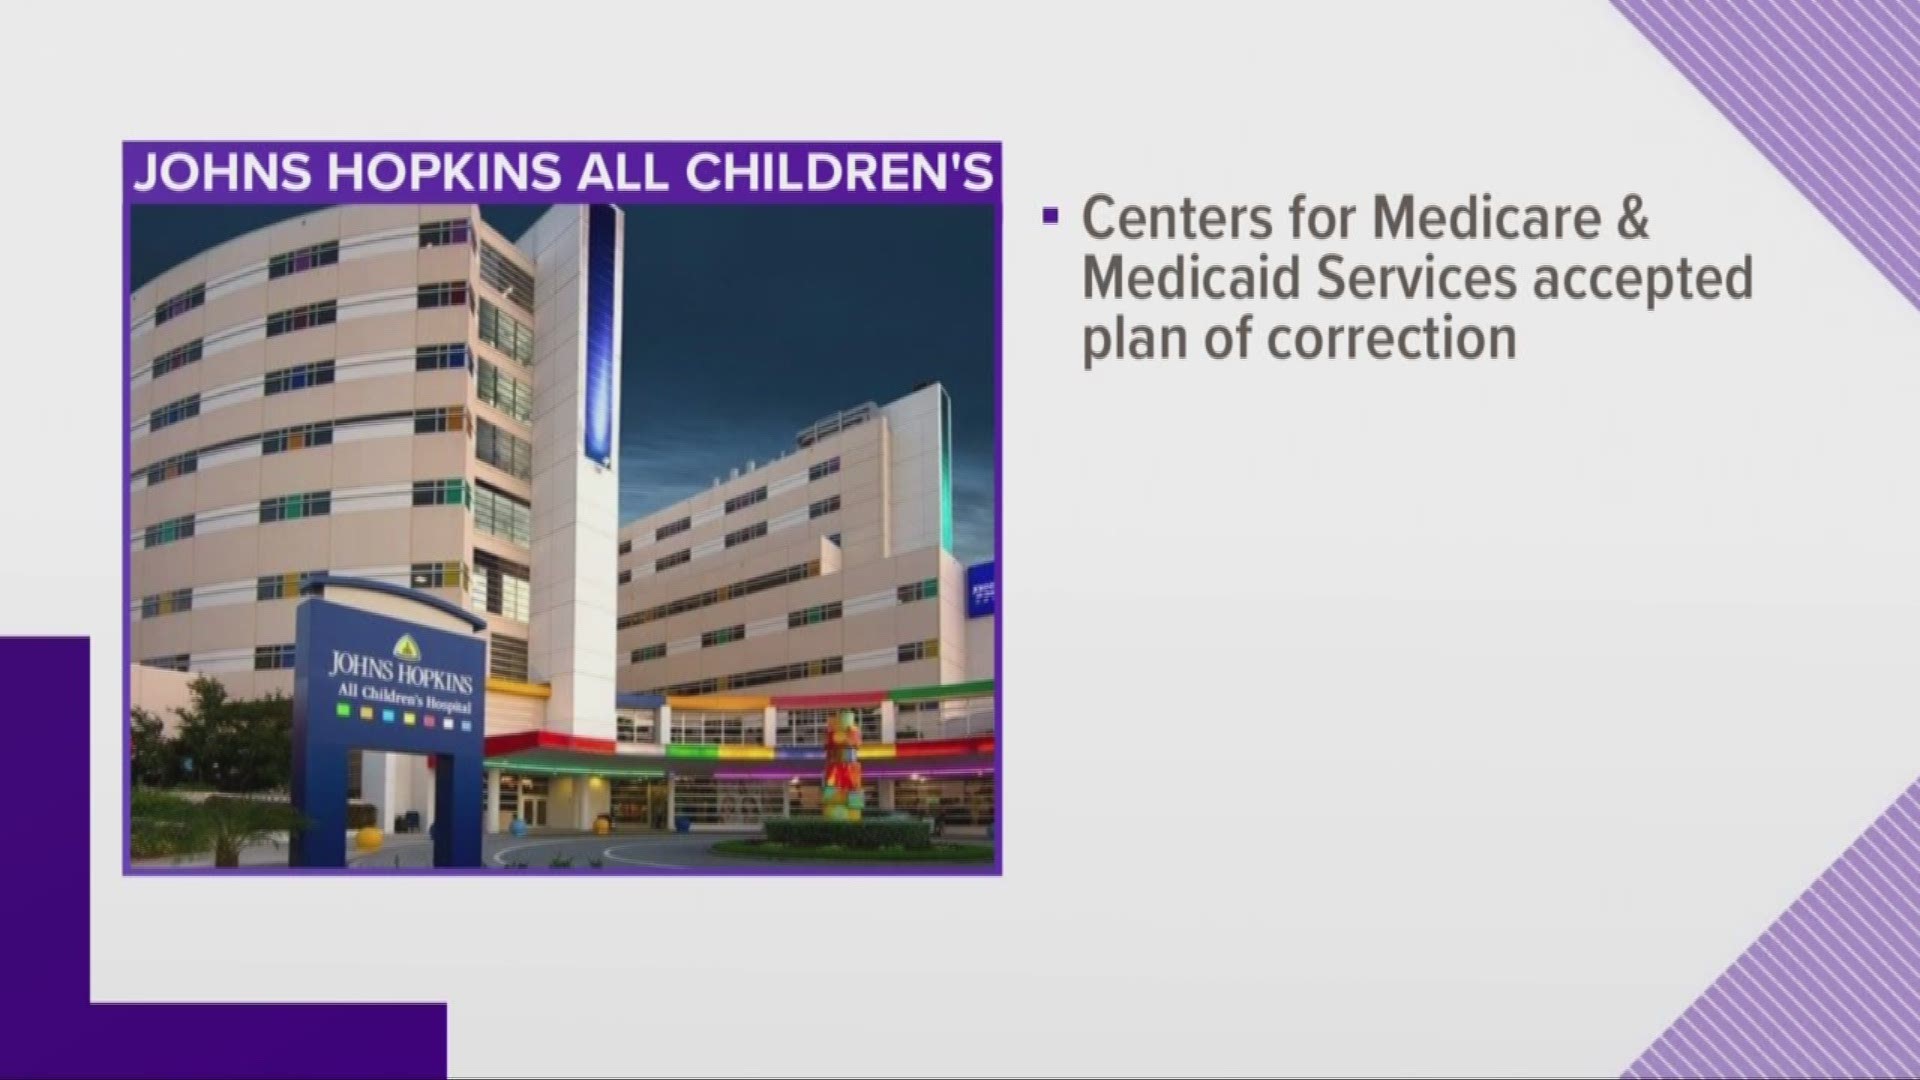 In the months since a Tampa Bay Times investigation exposed major problems in its heart surgery program, Johns Hopkins All Children's Hospital submitted a corrective action plan to the federal government.

The hospital said federal investigators have accepted its Plan of Correction and "through an on-site survey" found deficiencies have been corrected.